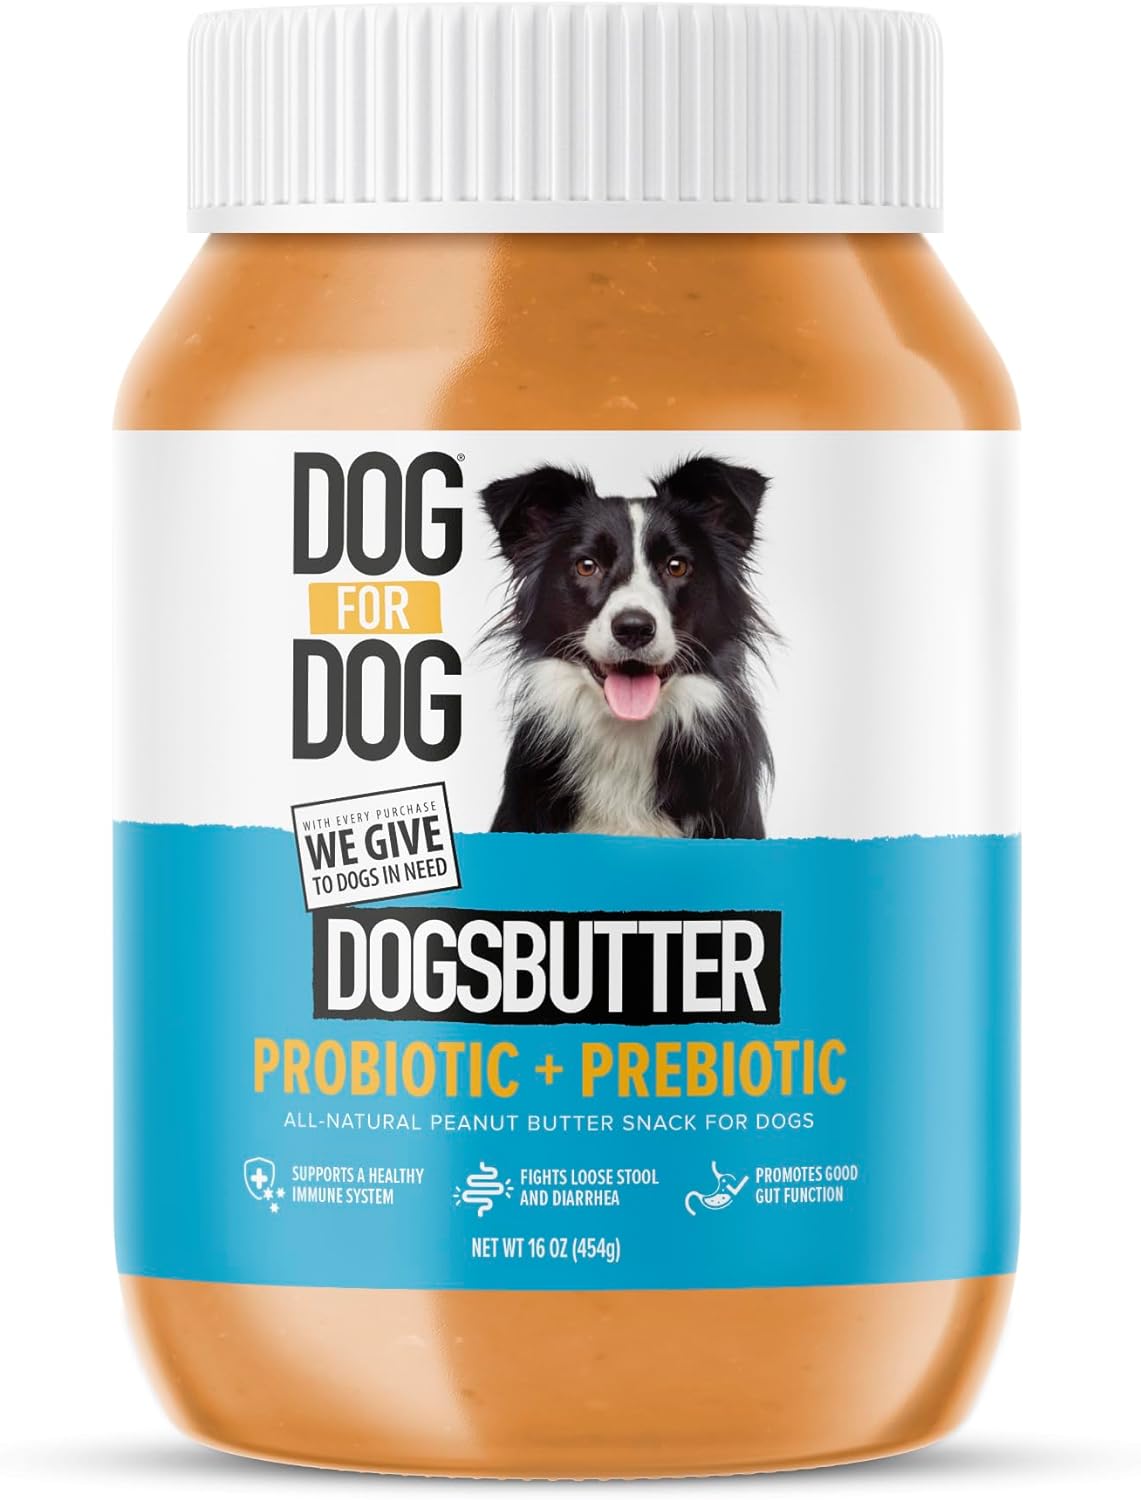 DOG for DOG Peanut Butter with Prebiotic & Probiotics for Dog | Dog Friendly Peanut Butter Treats Improves Immune System & Gut Health | Dog Probiotic Calming Treats for Itchy Skin - Made in The USA